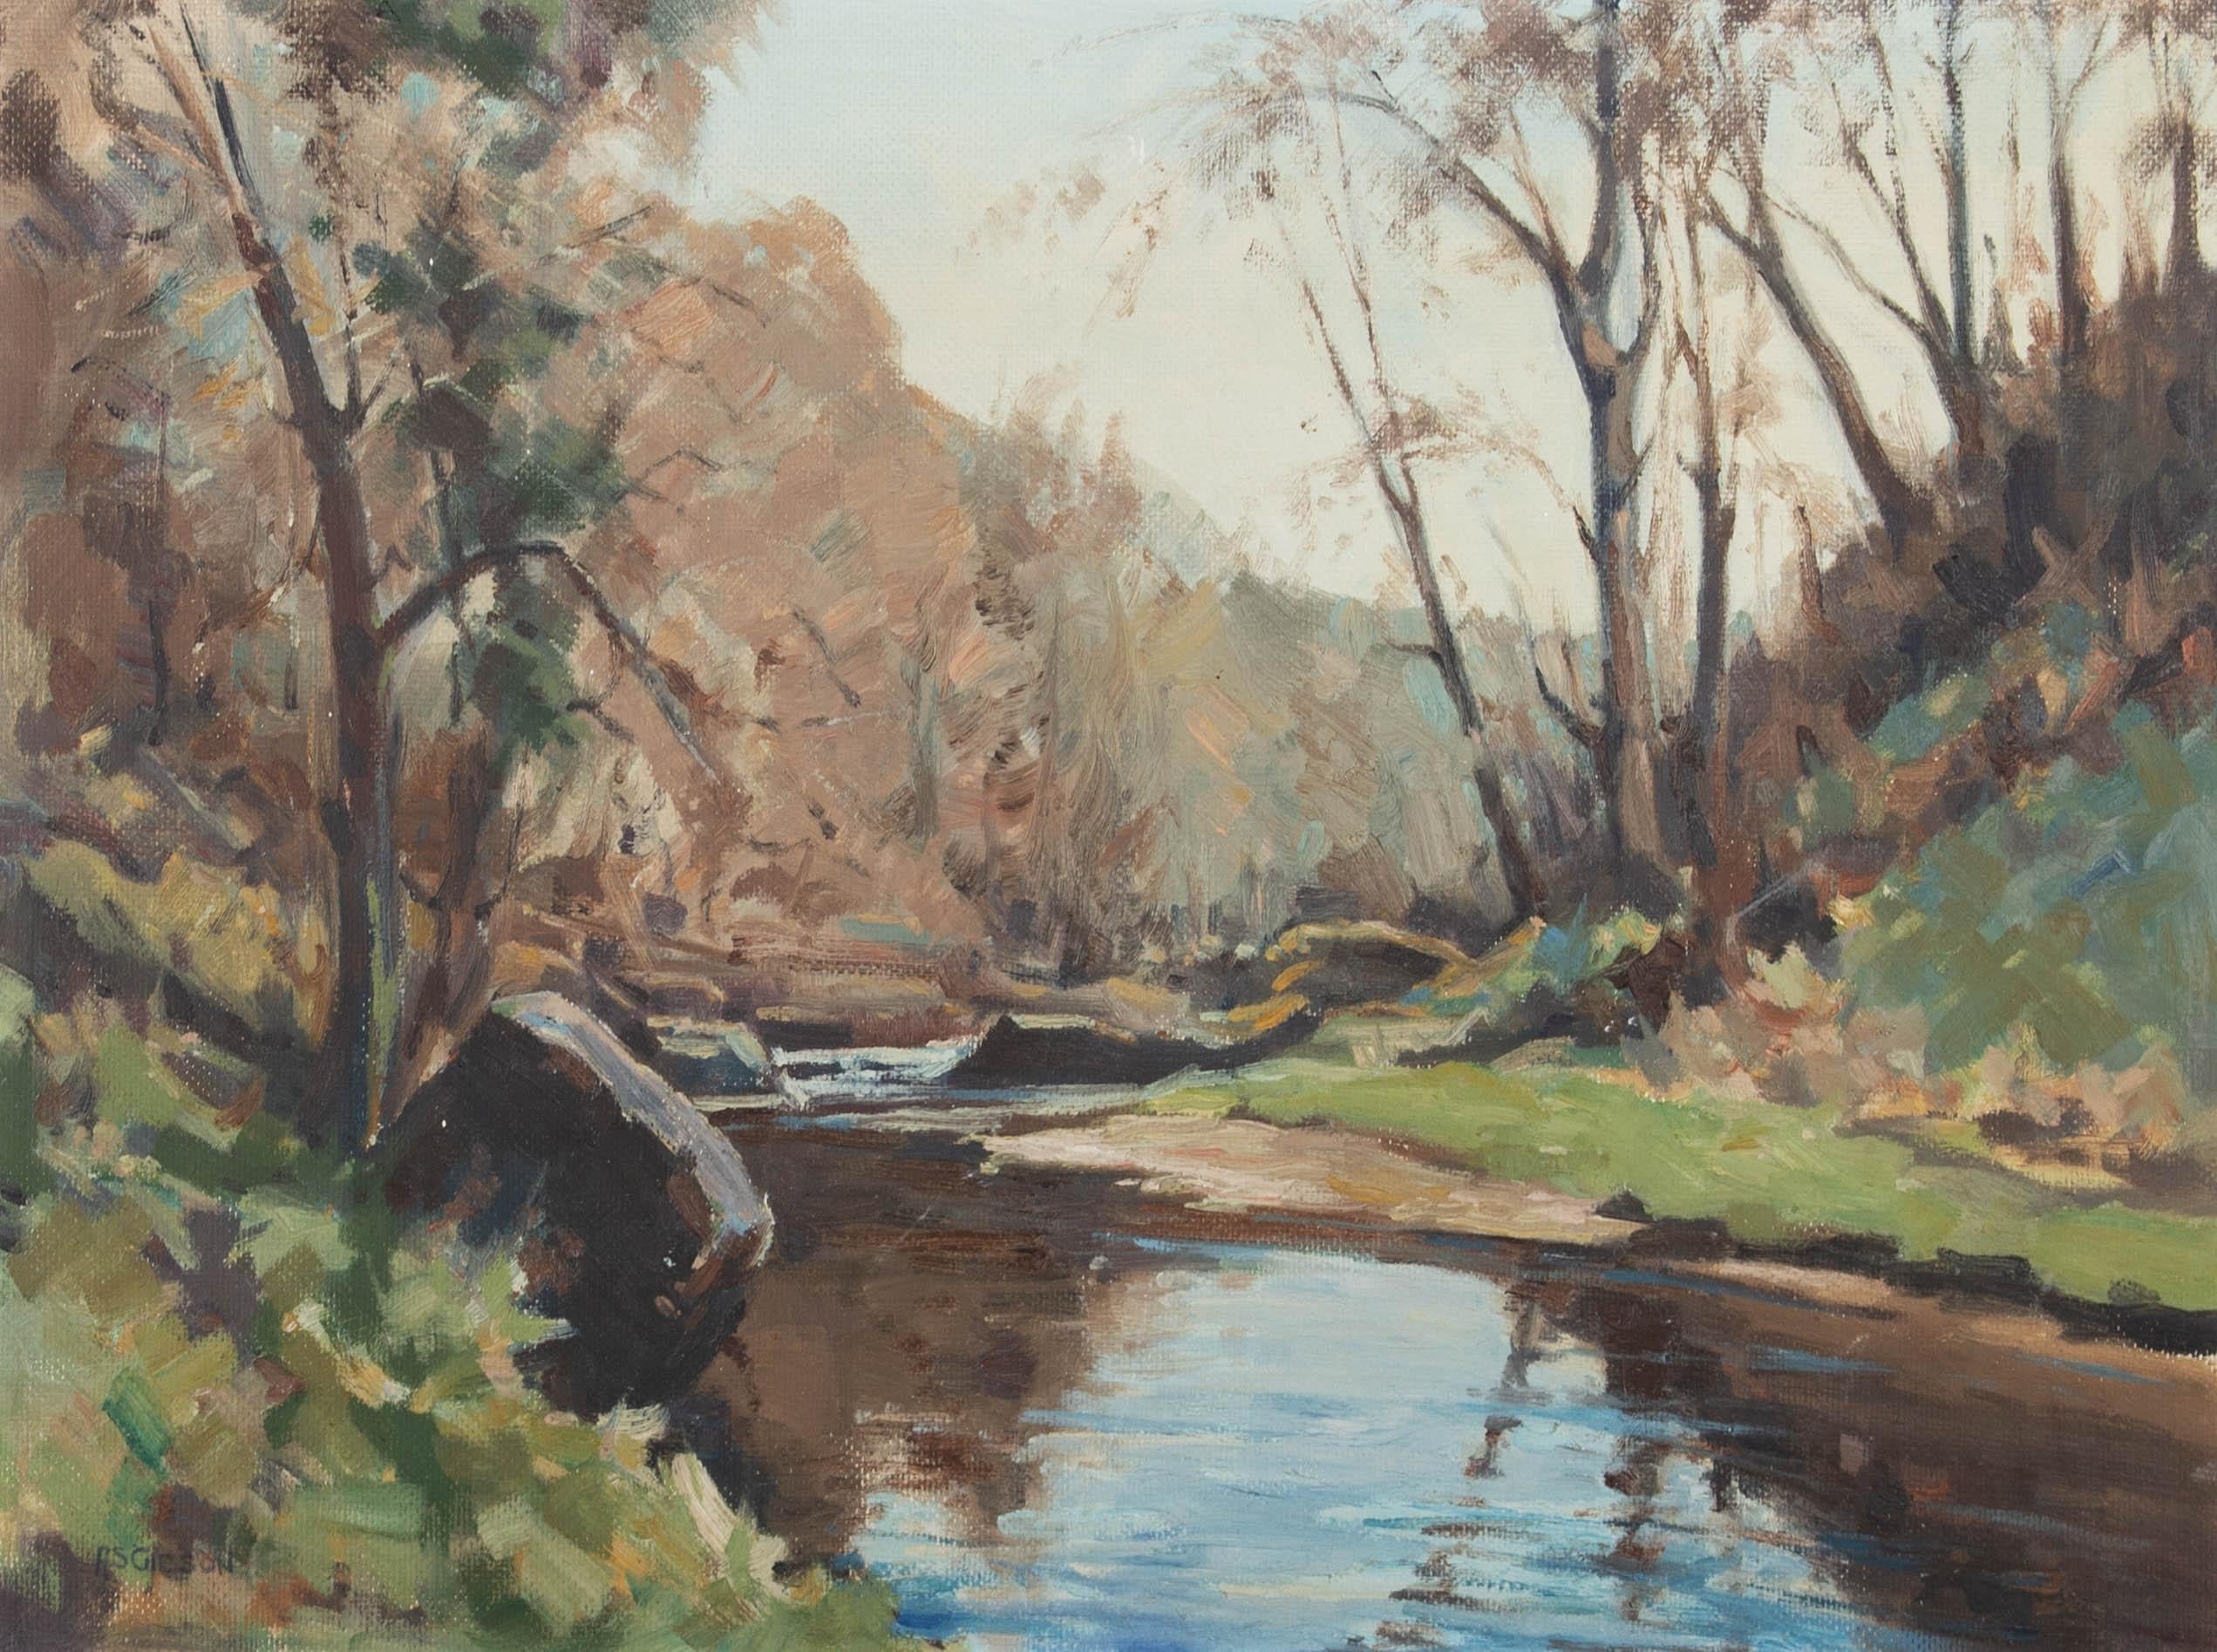 Depicting a calm river running through a woodland area. The artist has captured the scene in gestural, sweeping brush strokes and a muted colour palette, adding to the relaxed atmosphere of the composition. Signed to the lower left. Presented in a